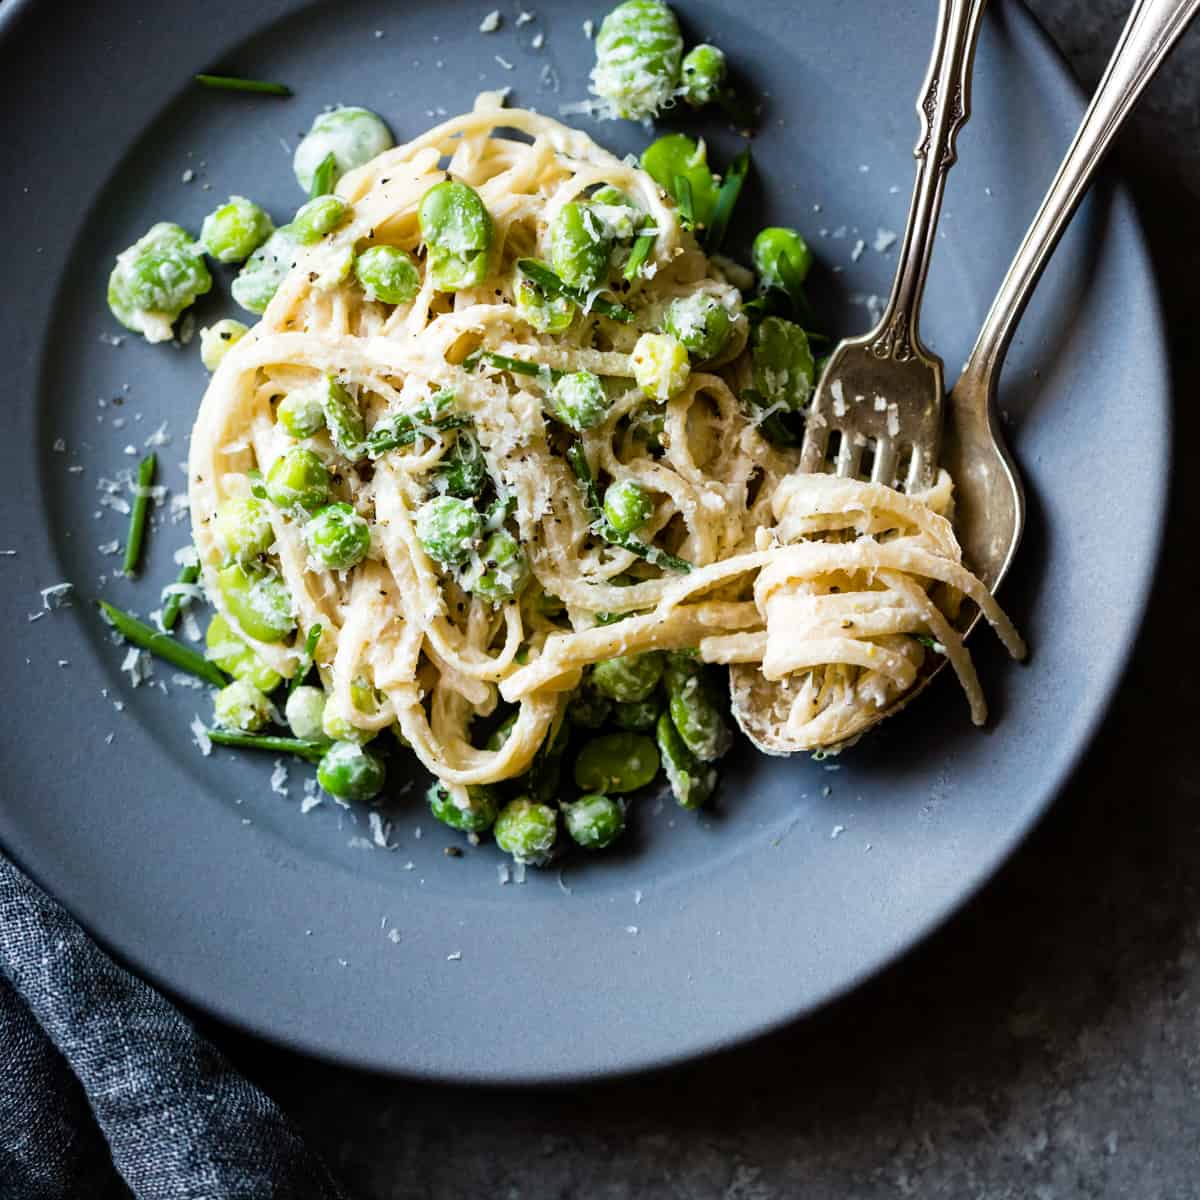 delicious Creamy Cashew-Miso Pasta with Peas and Fava Beans {gluten-free, vegan option}